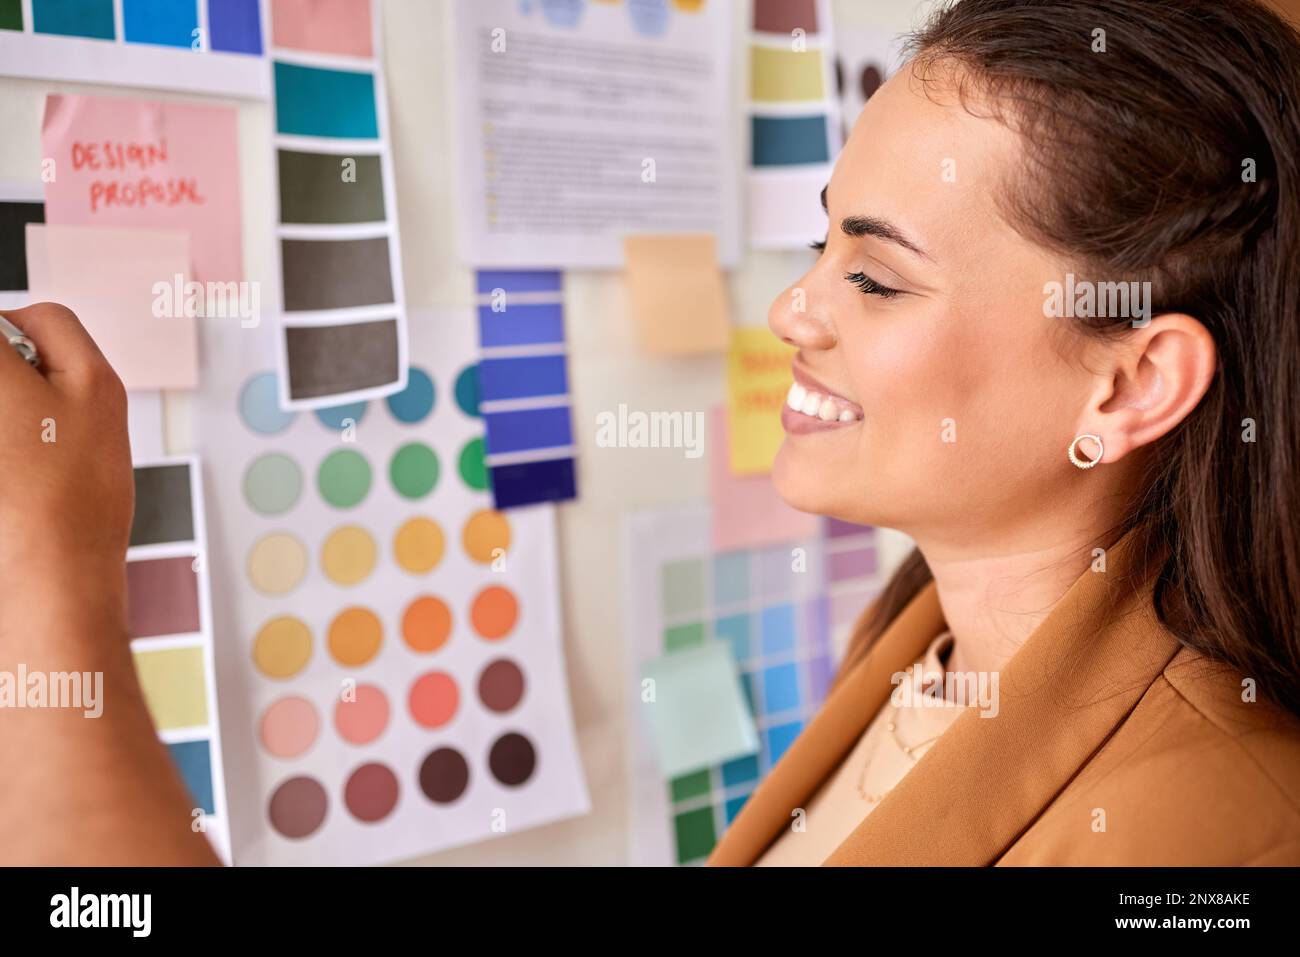 Designer, color palette and woman planning creative project, startup brand development and moodboard inspiration. Ideas, brainstorming and happy Stock Photo